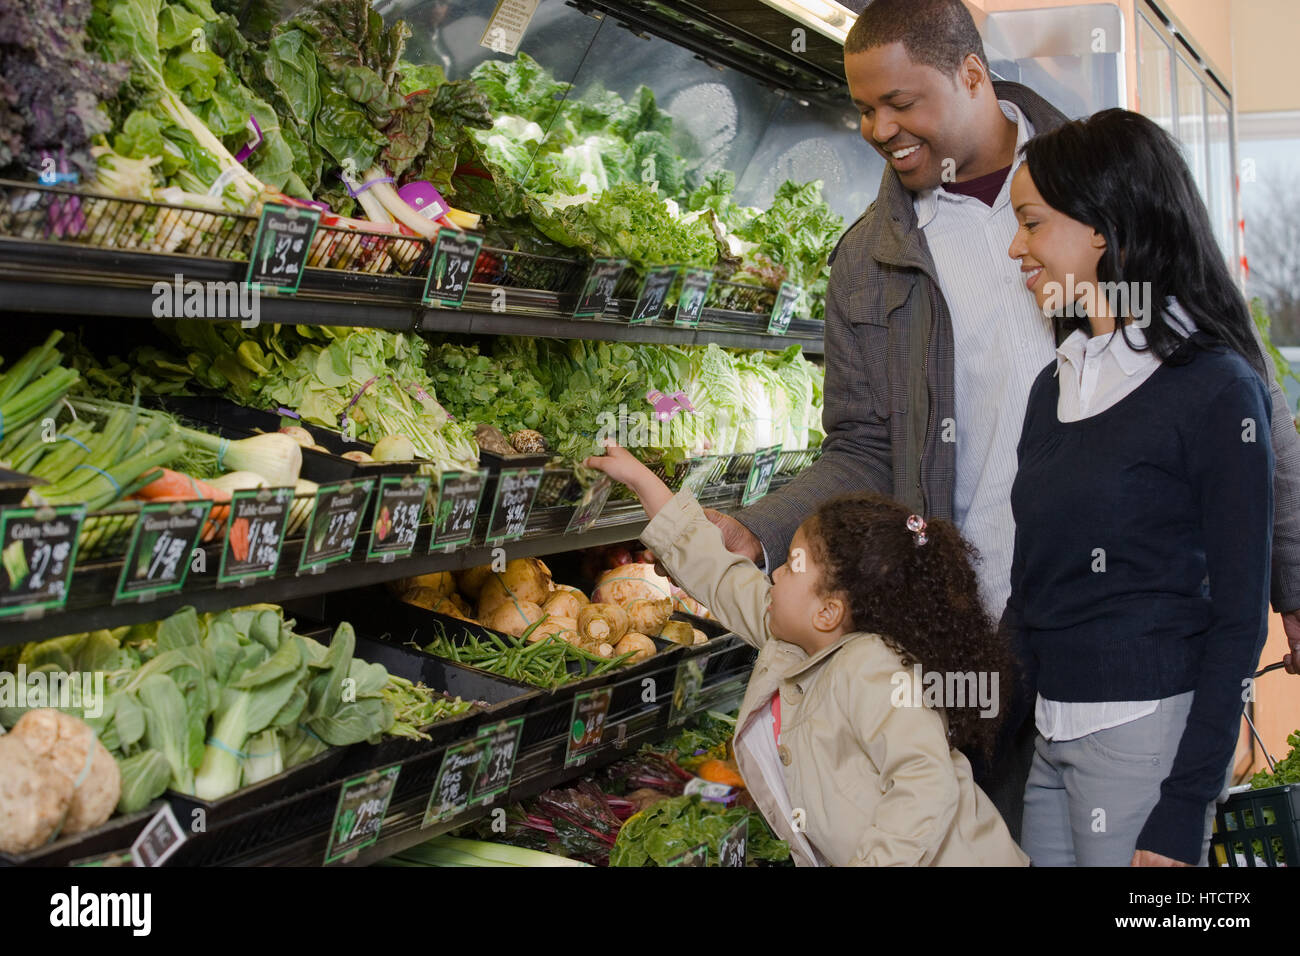 https://c8.alamy.com/comp/HTCTPX/family-shopping-in-a-supermarket-HTCTPX.jpg